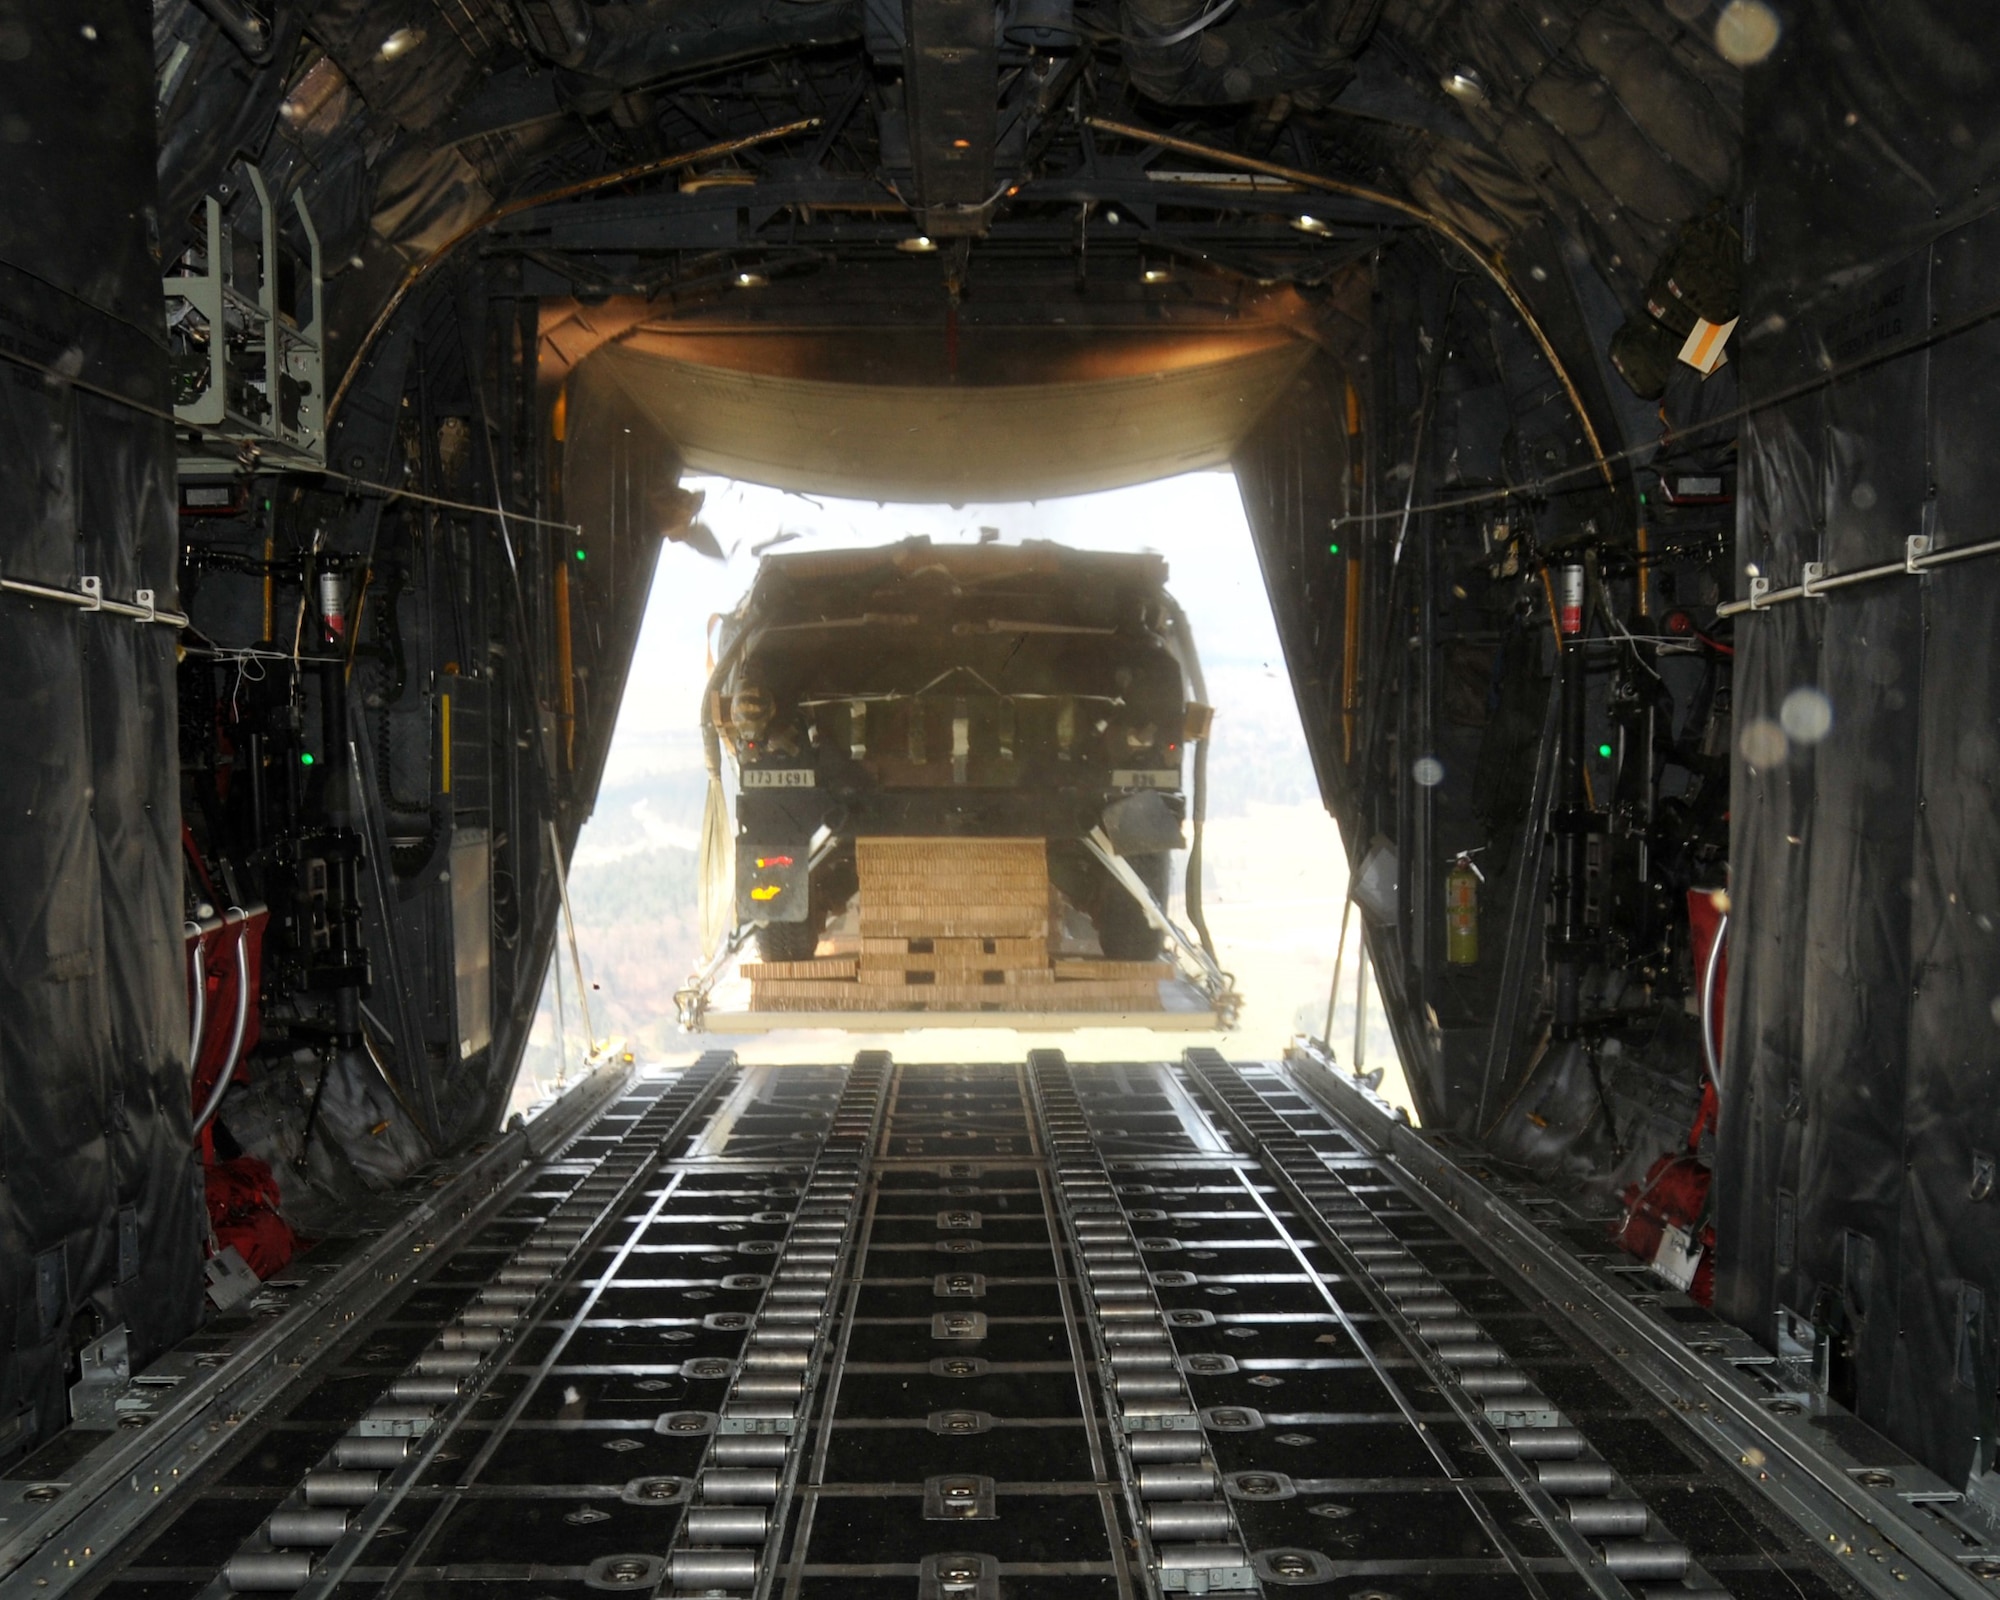 A Humvee is air dropped out of the back of a C-130 Hercules over Hohenfels Training Area, Germany on April 11, 2016. The 94th Airlift Wing participated in Exercise Saber Junction 16 April 11-15. (U.S. Air Force photo/ Senior Airman Andrew J. Park)
